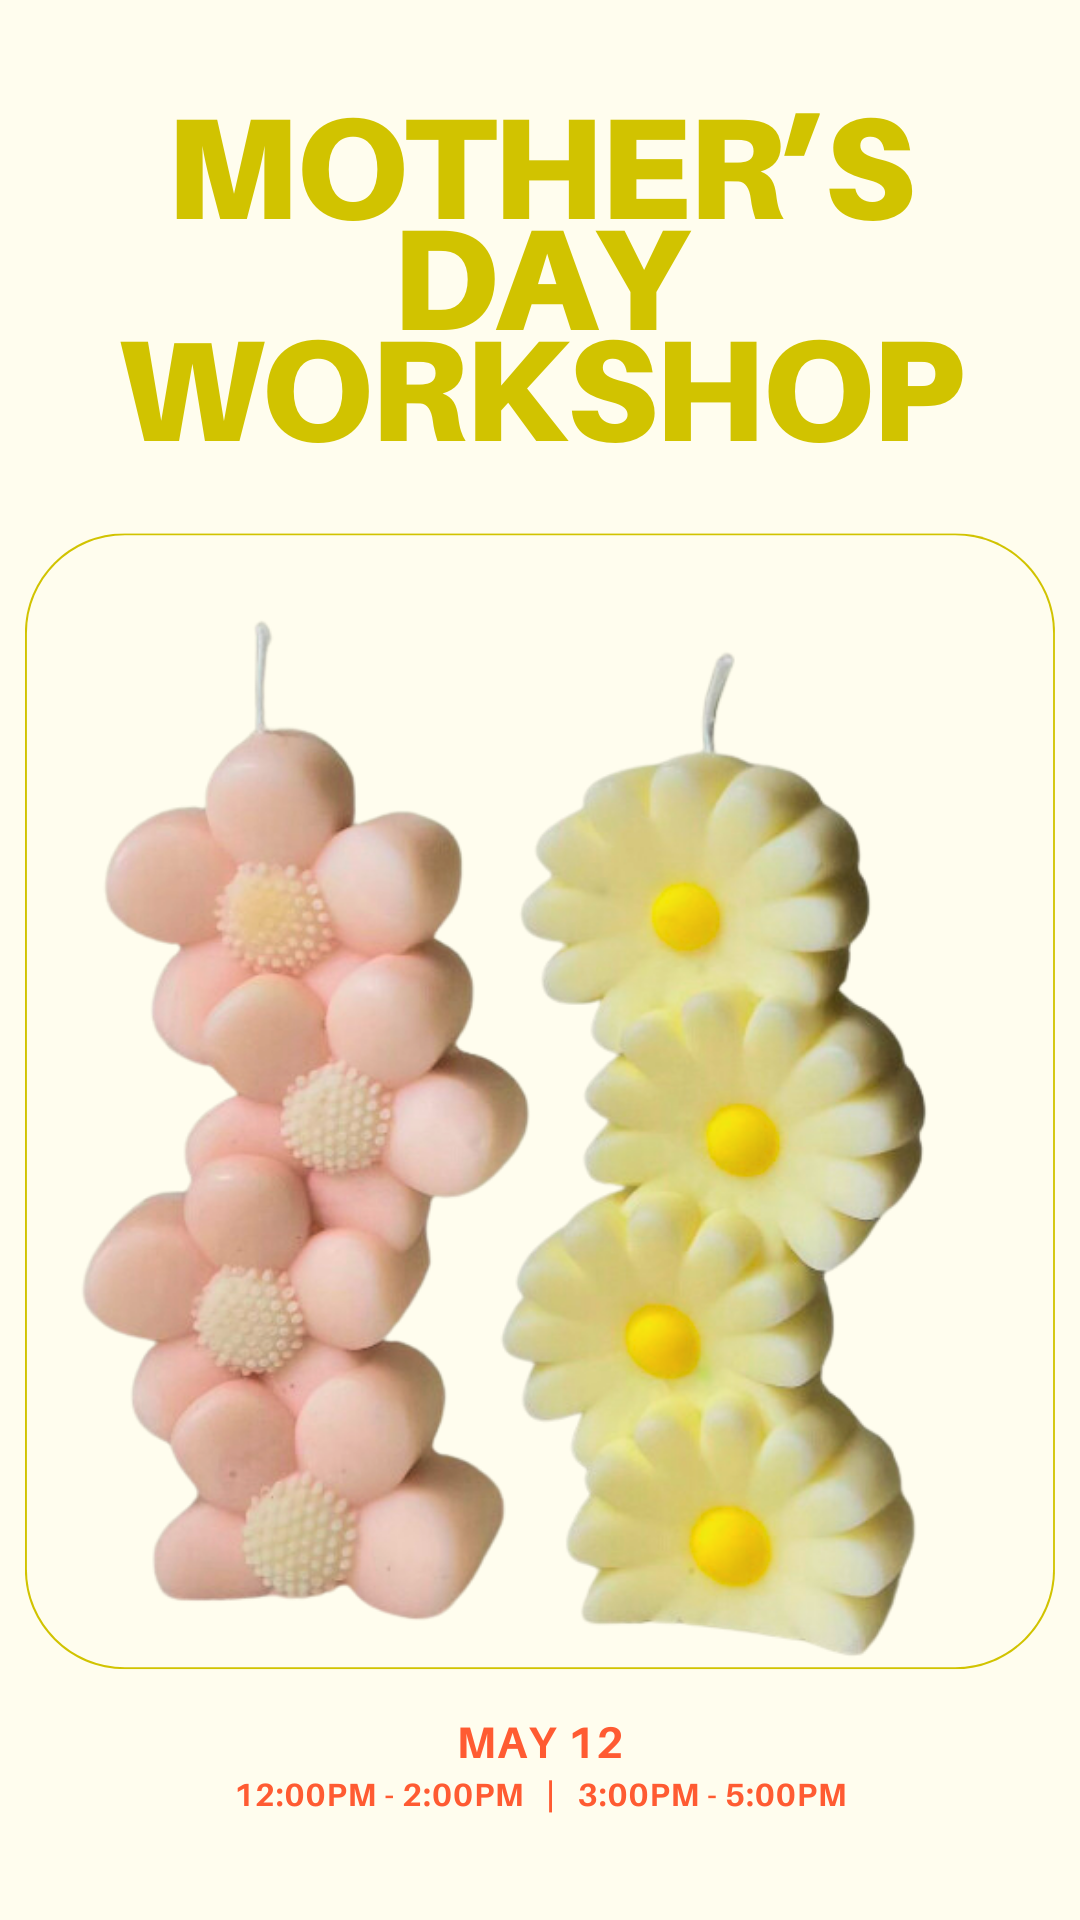 Mother's Day Candle Workshop